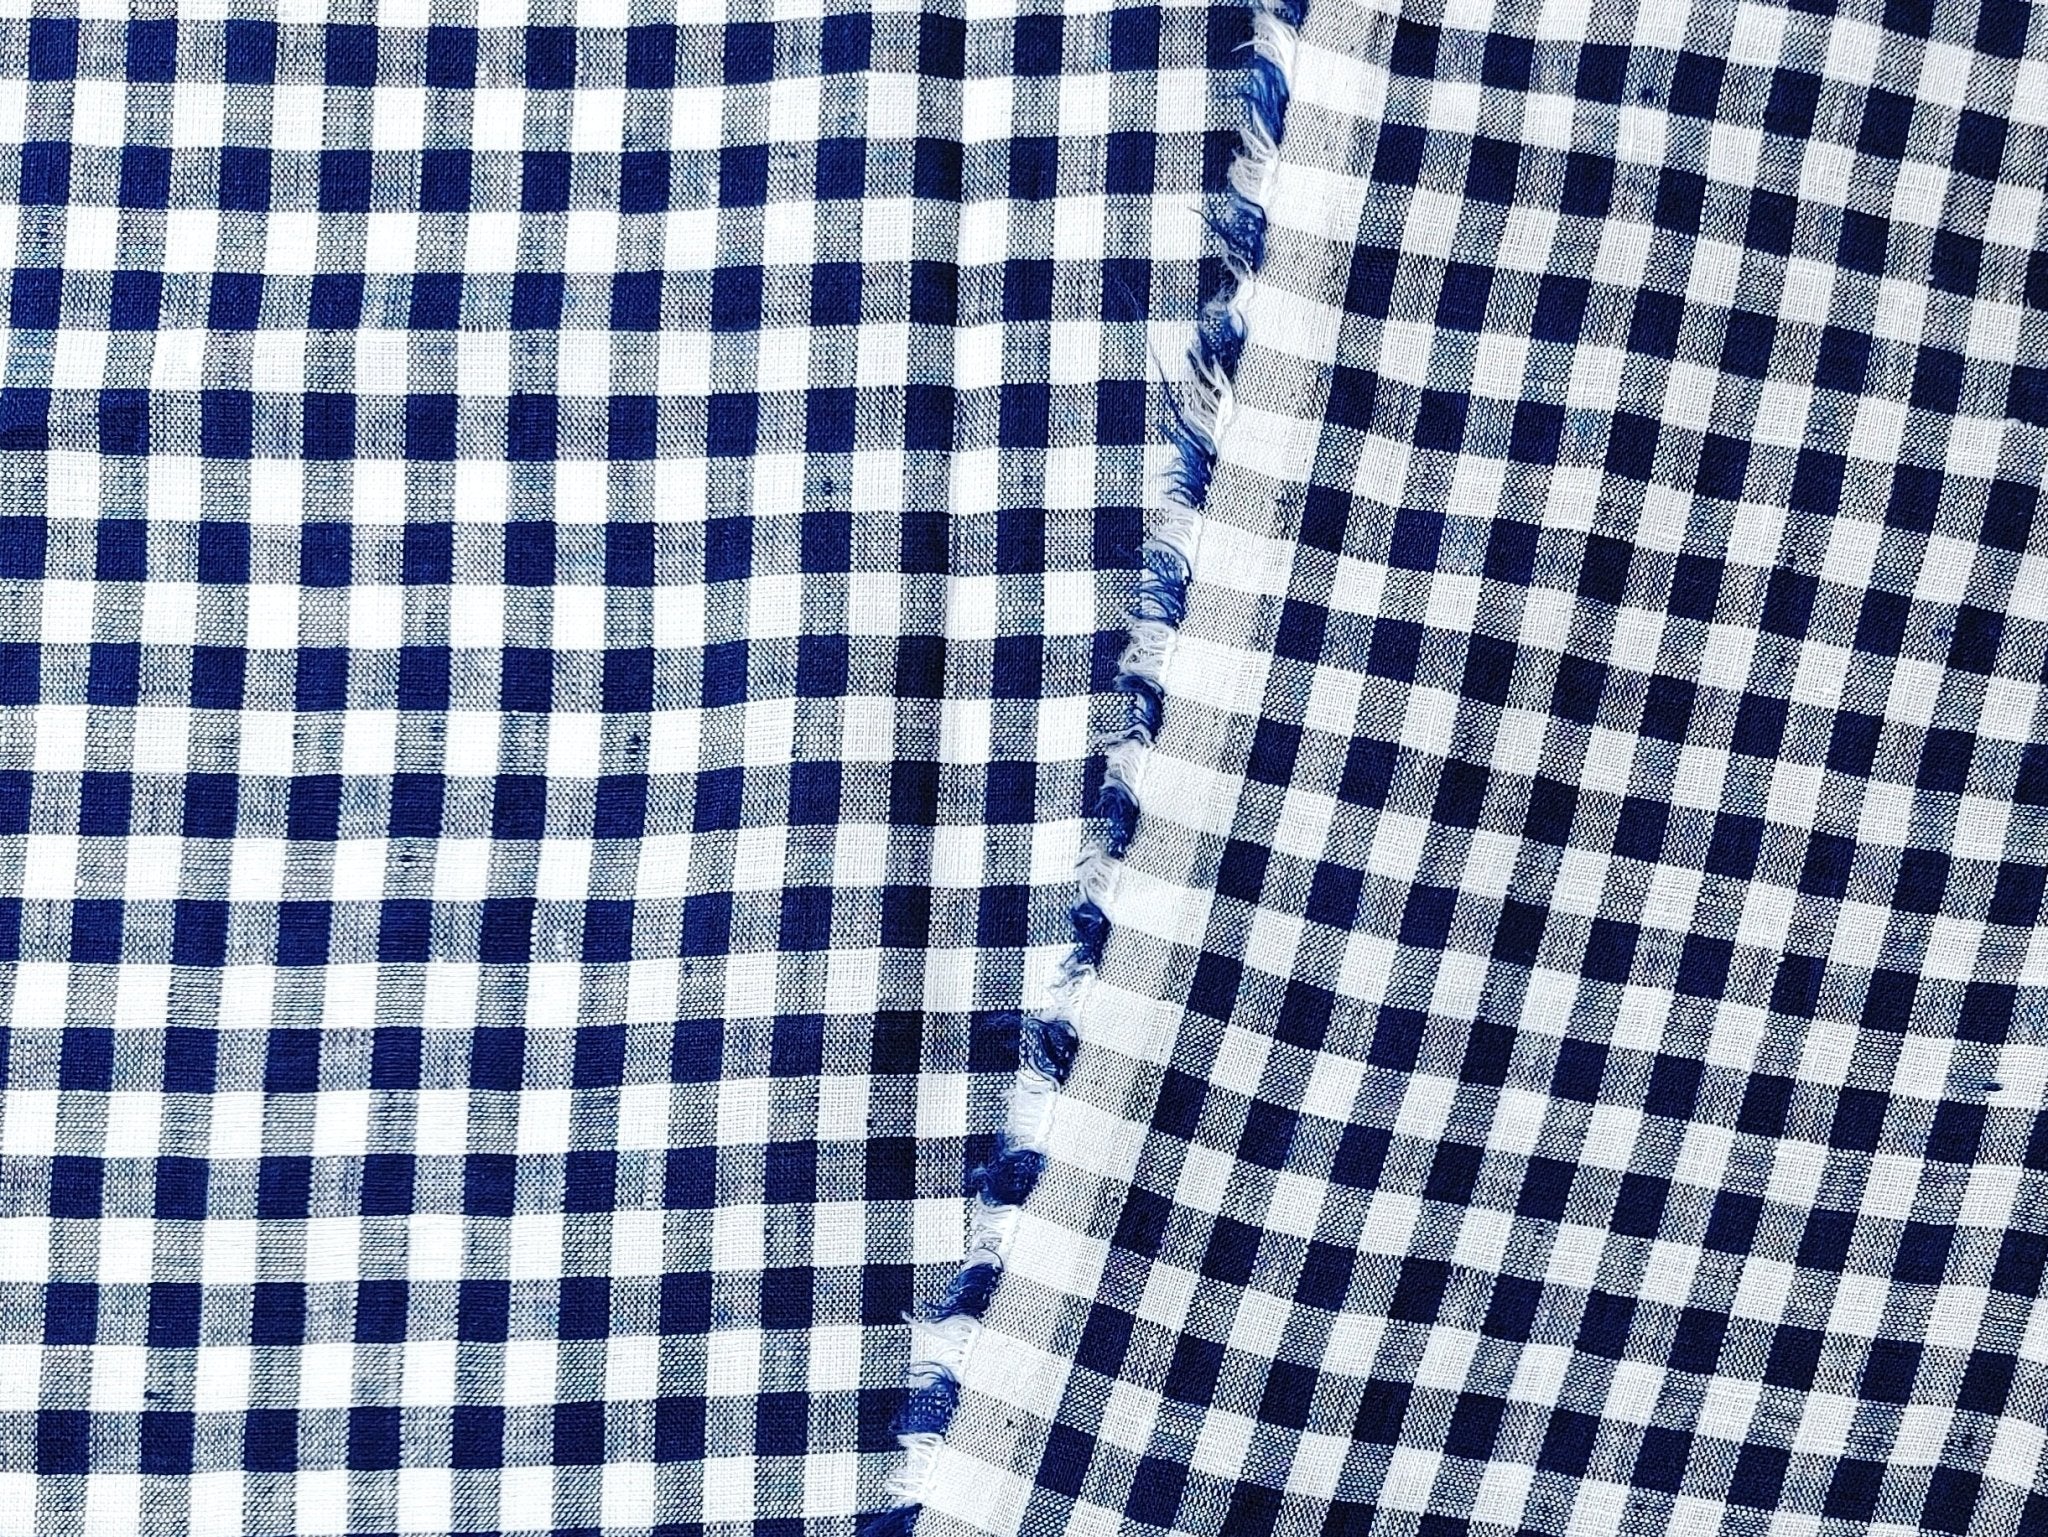 100% Linen Navy Small Gingham Check - Light and Airy 4684 - The Linen Lab - Navy